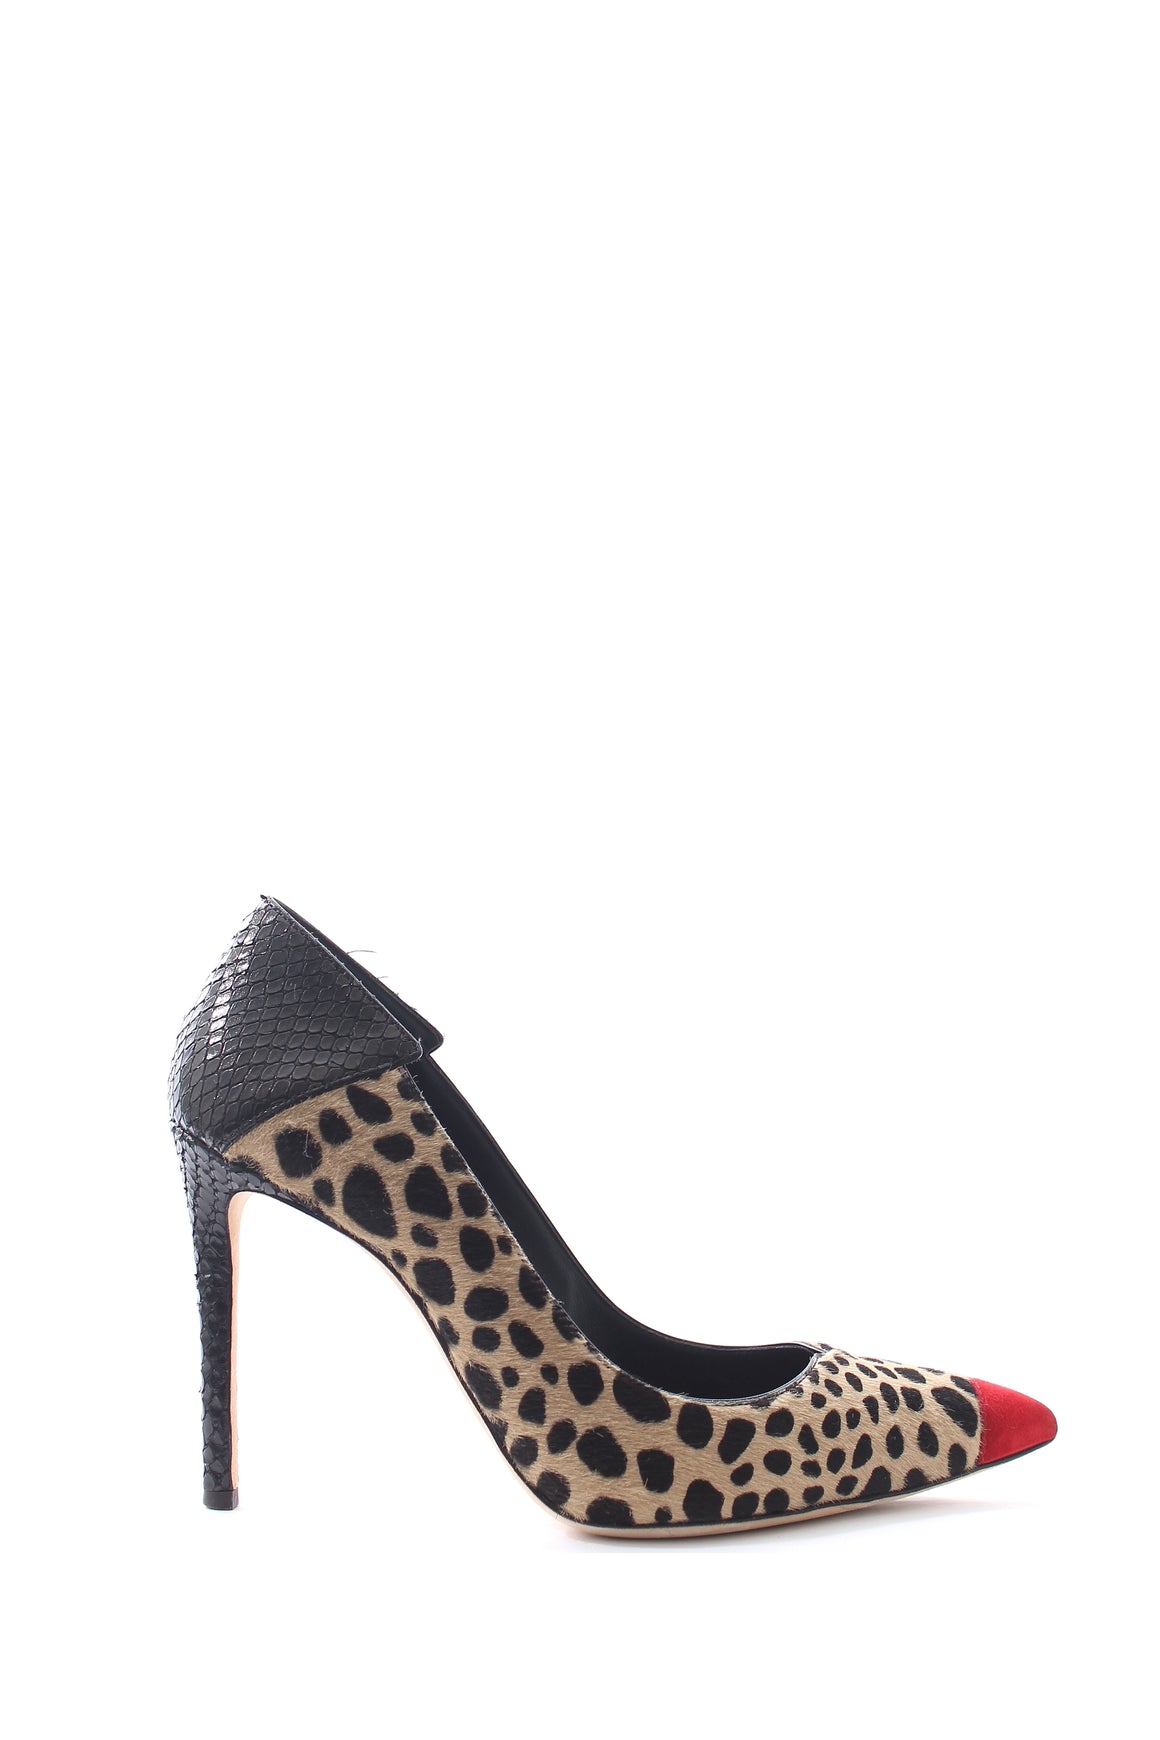 Giuseppe Zanotti Leopard-Printed Calf Hair and Leather 105 Pumps